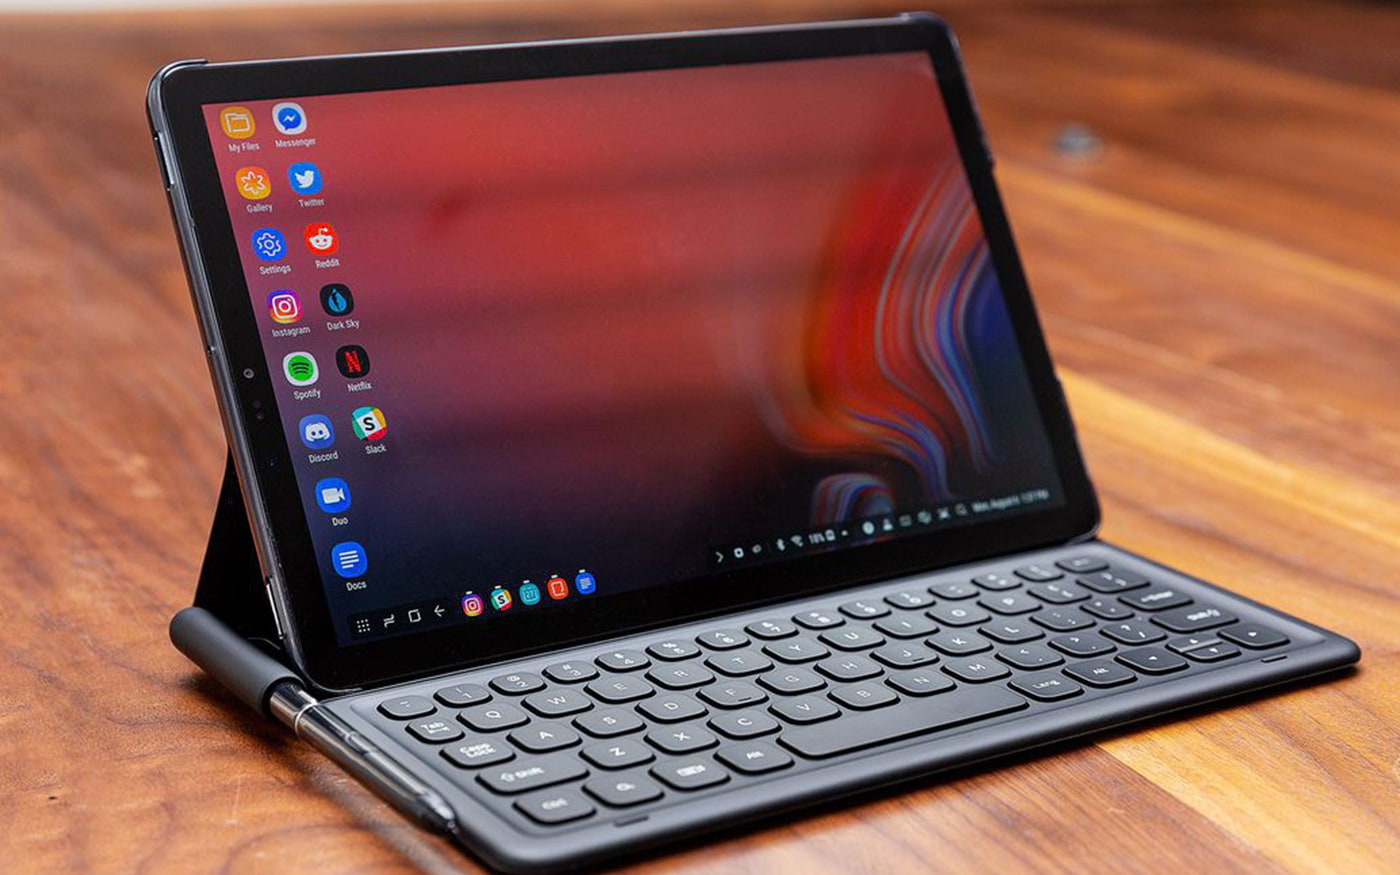 Galaxy Tab S4 gets security patch in March